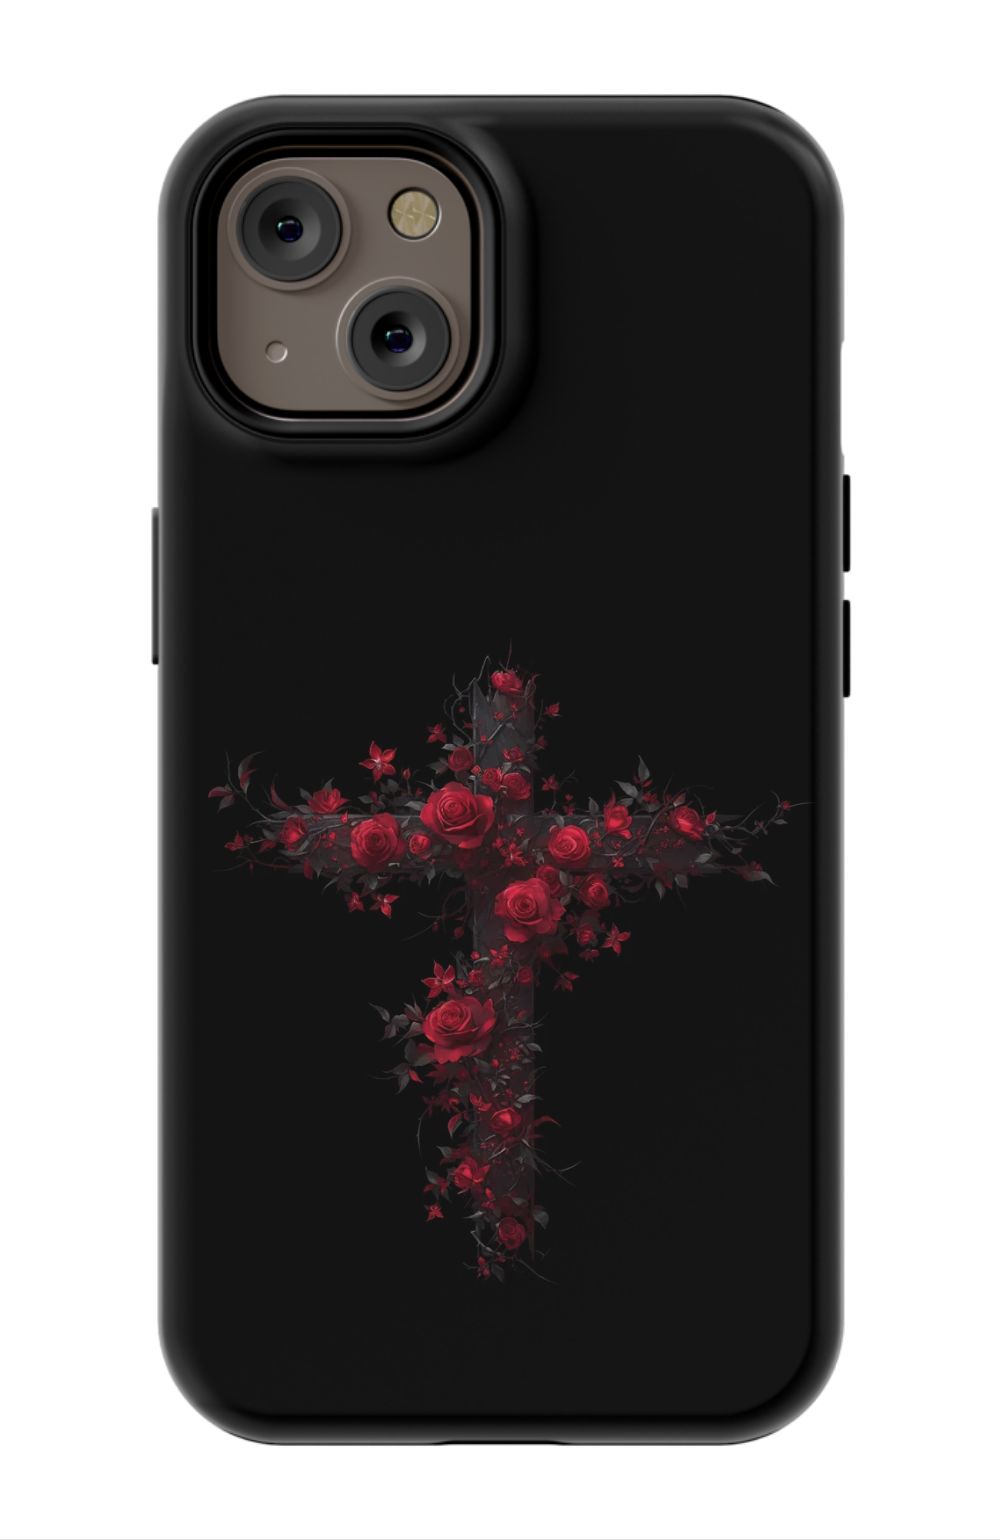 Phone Case "Rustic Embrace": A Symbol of Enduring Faith and Unwavering Love